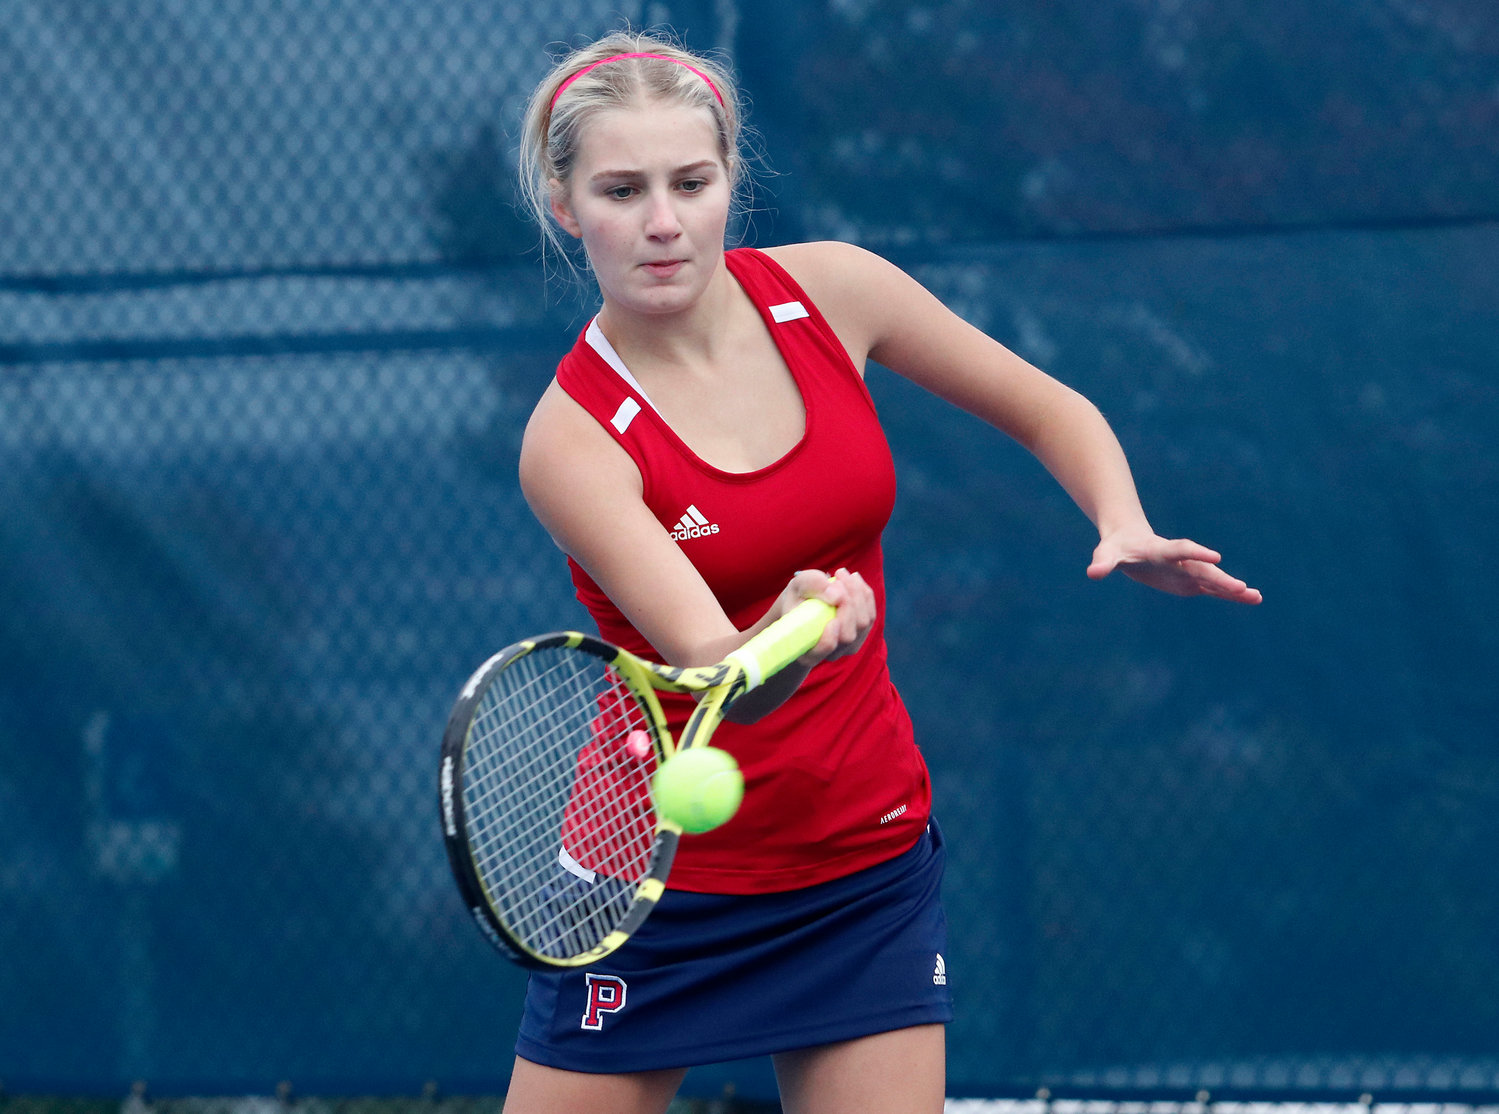 Brooke Morrissey lost to Ella Quisnelle of Mt. Hope in three sets in the No. 4 singles matchup, 6-2,4-6,6-4.